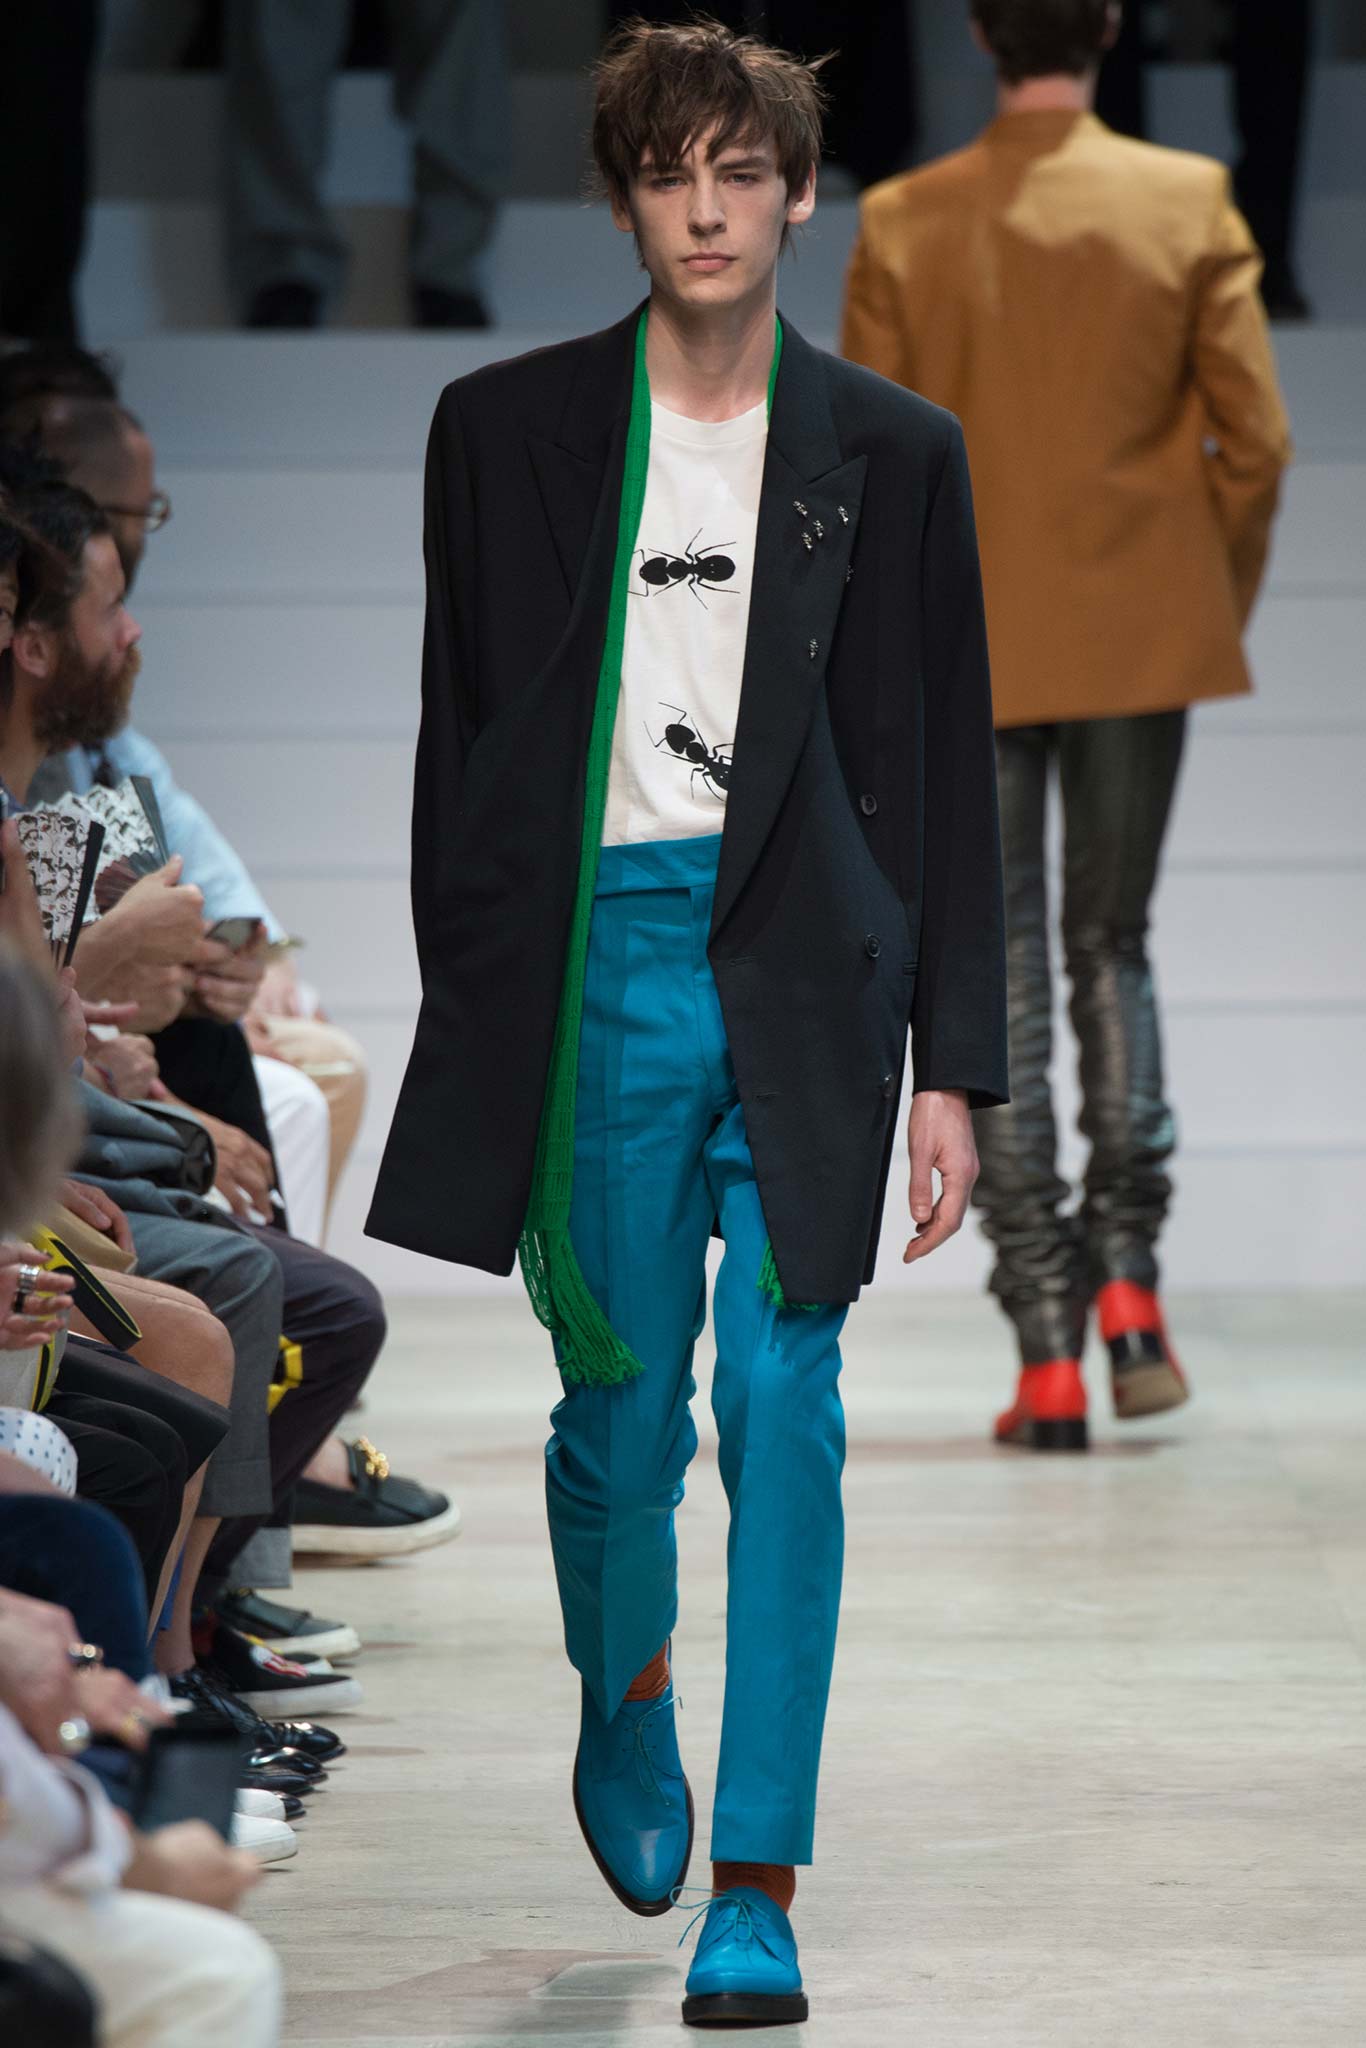 Paul Smith Spring/Summer 2016 Paris - Fashionably Male